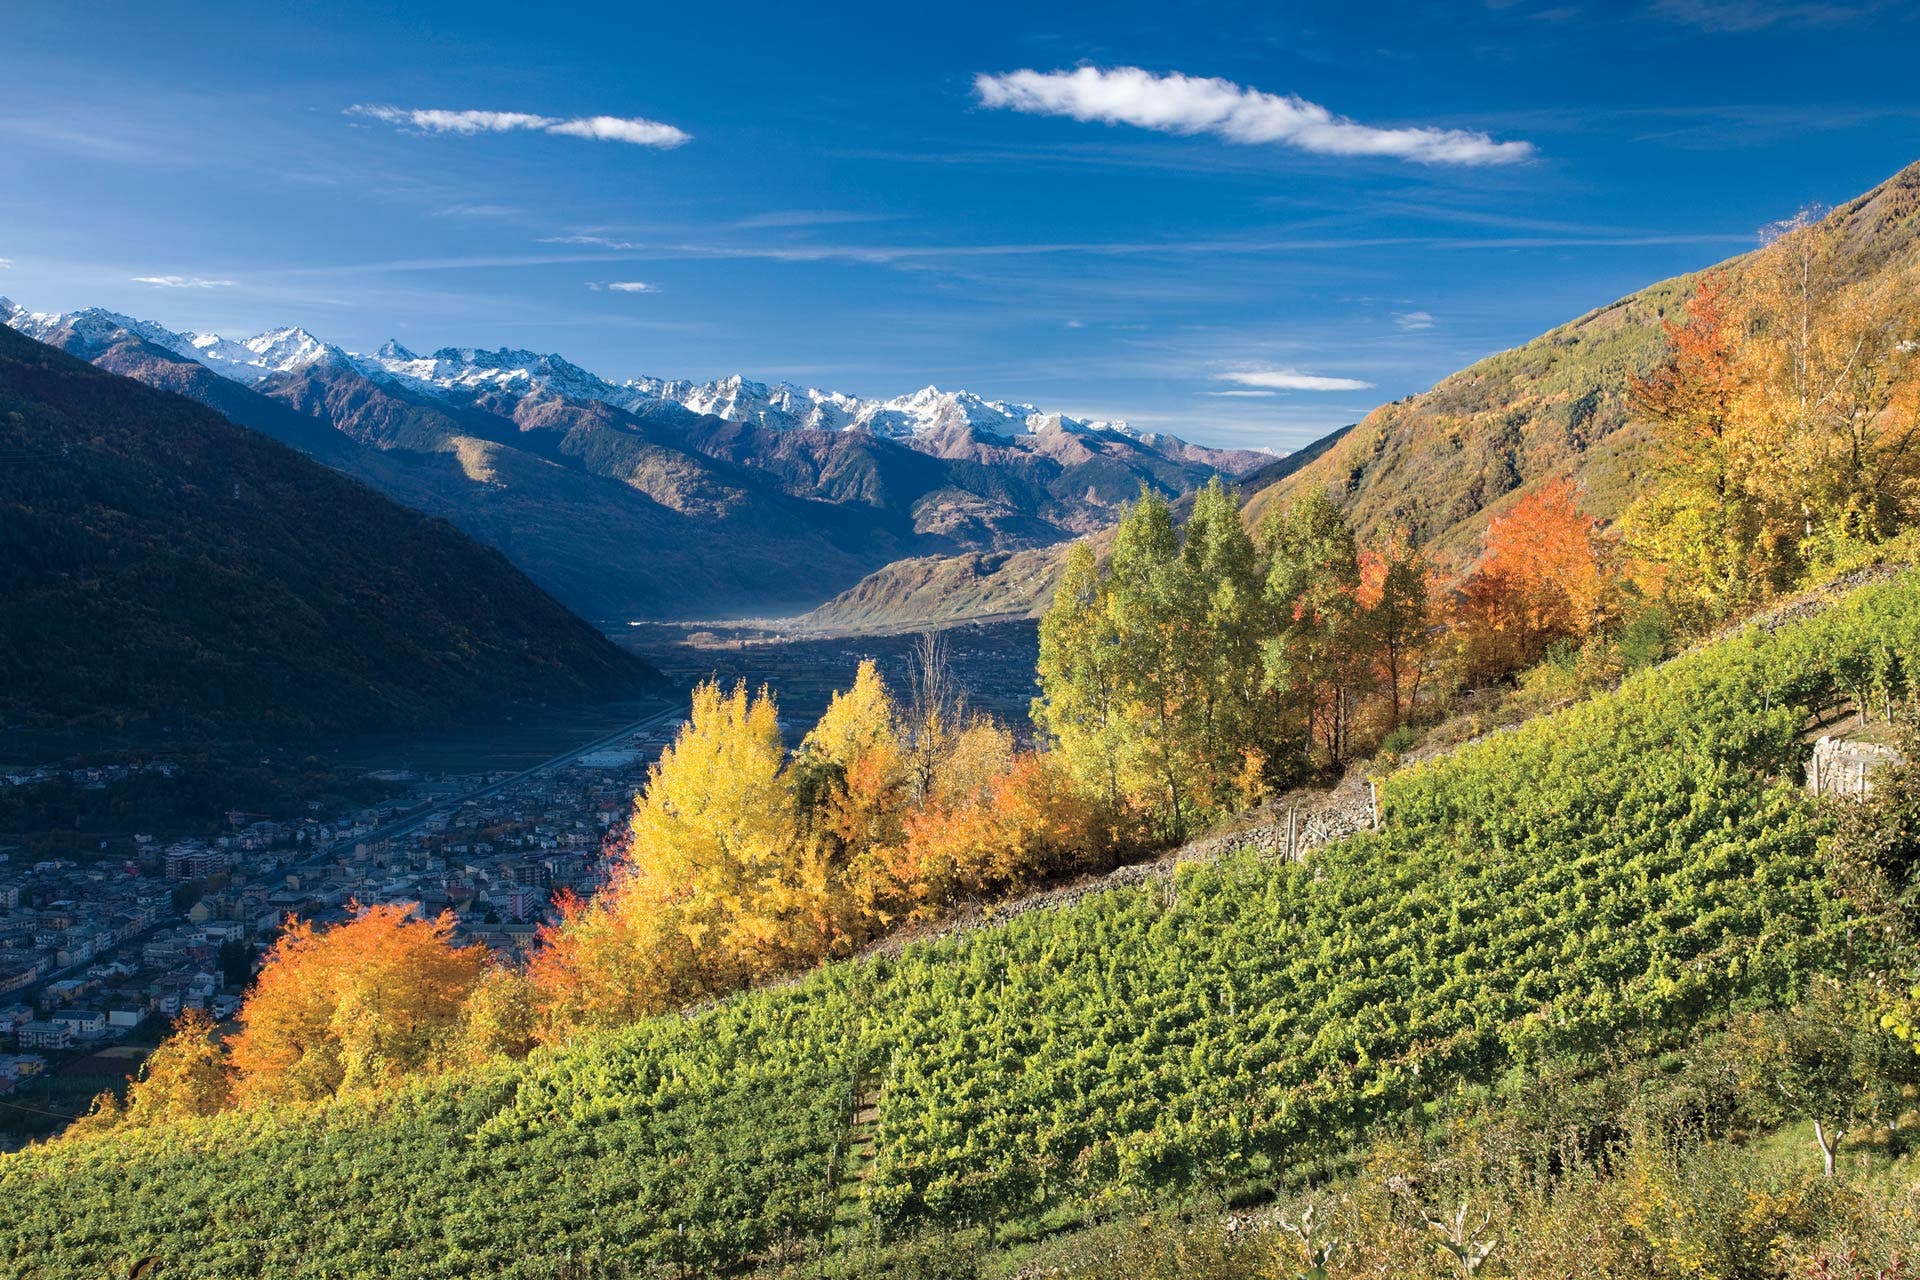 Tirano Landscape with vineyards and mountains